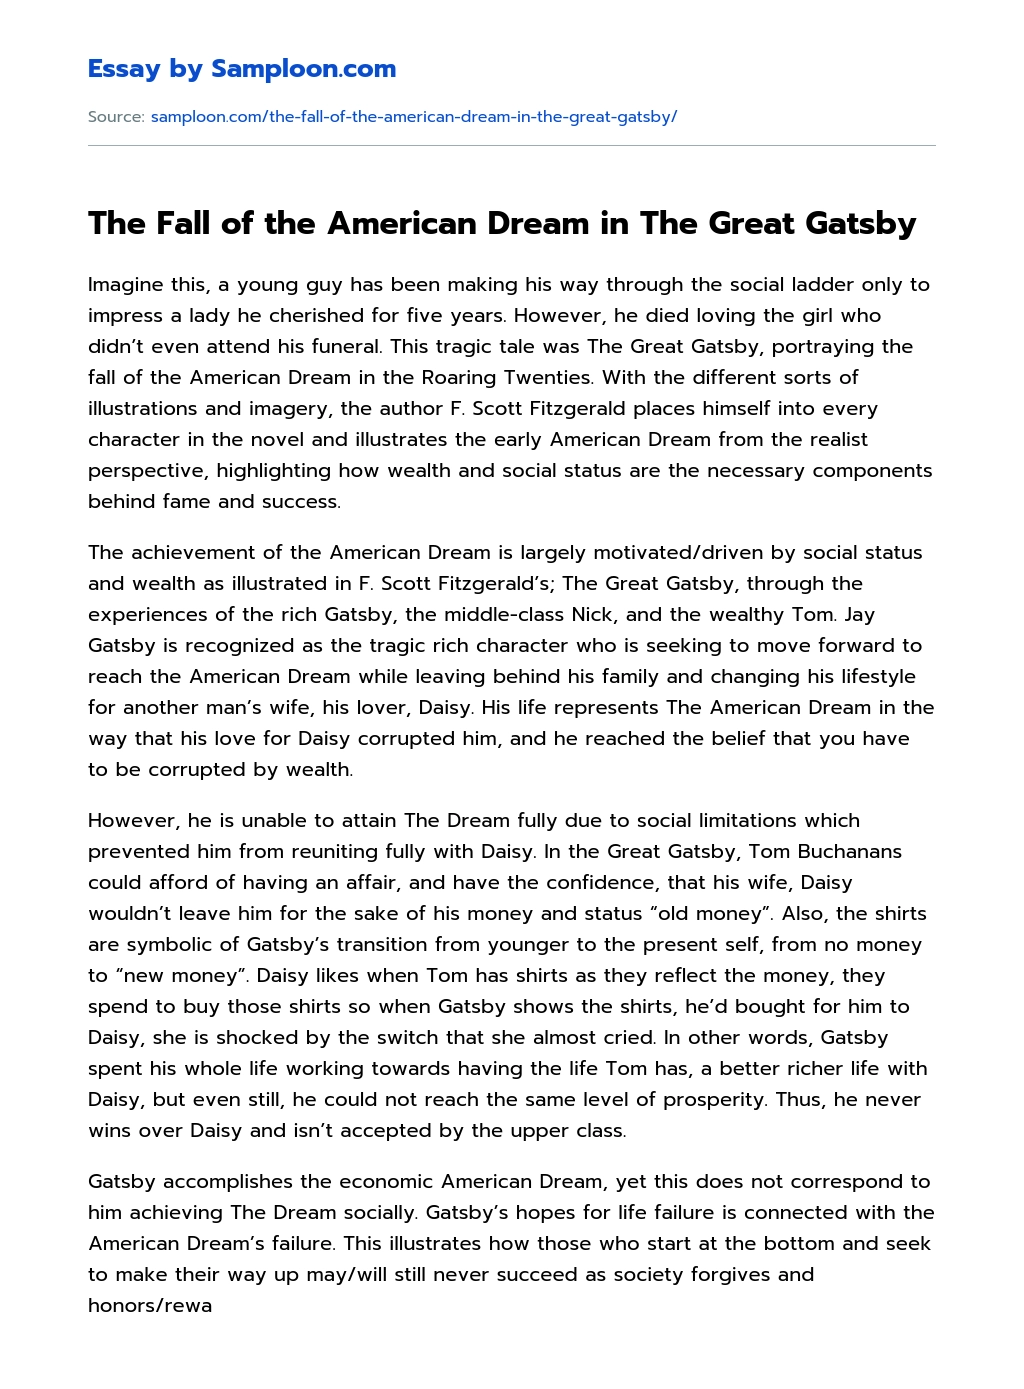 The Fall of the American Dream in The Great Gatsby essay